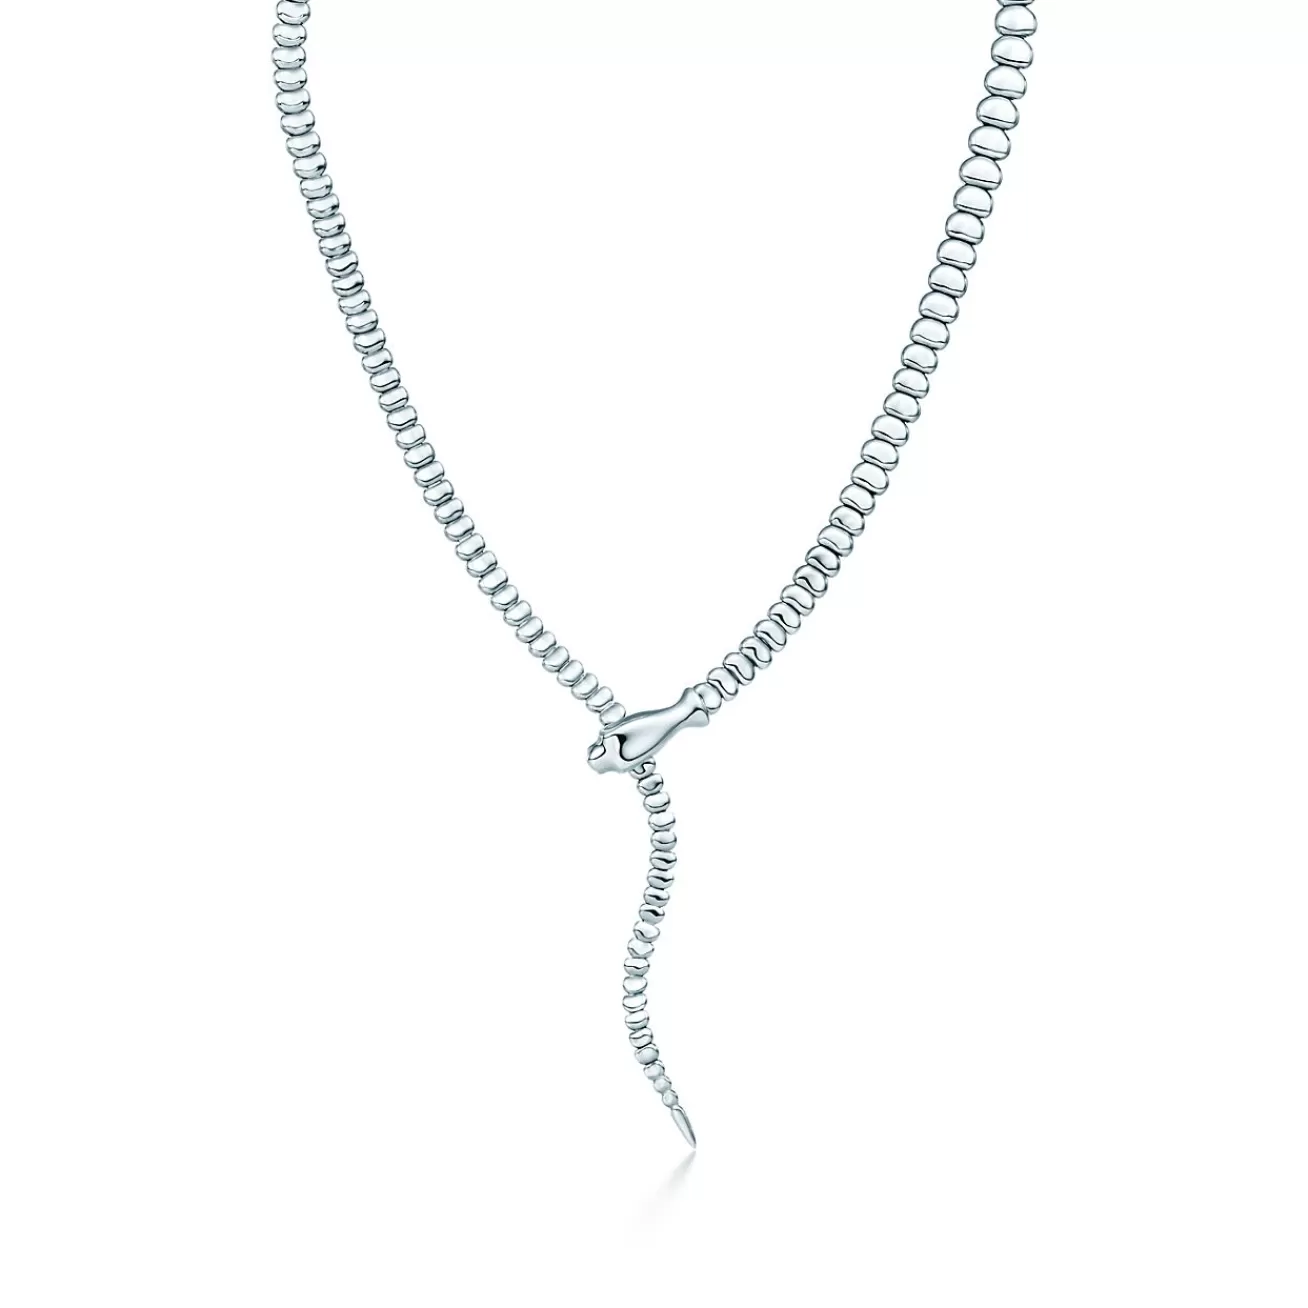 Tiffany & Co. Elsa Peretti® Snake Necklace in Sterling Silver | ^ Necklaces & Pendants | Bold Silver Jewelry